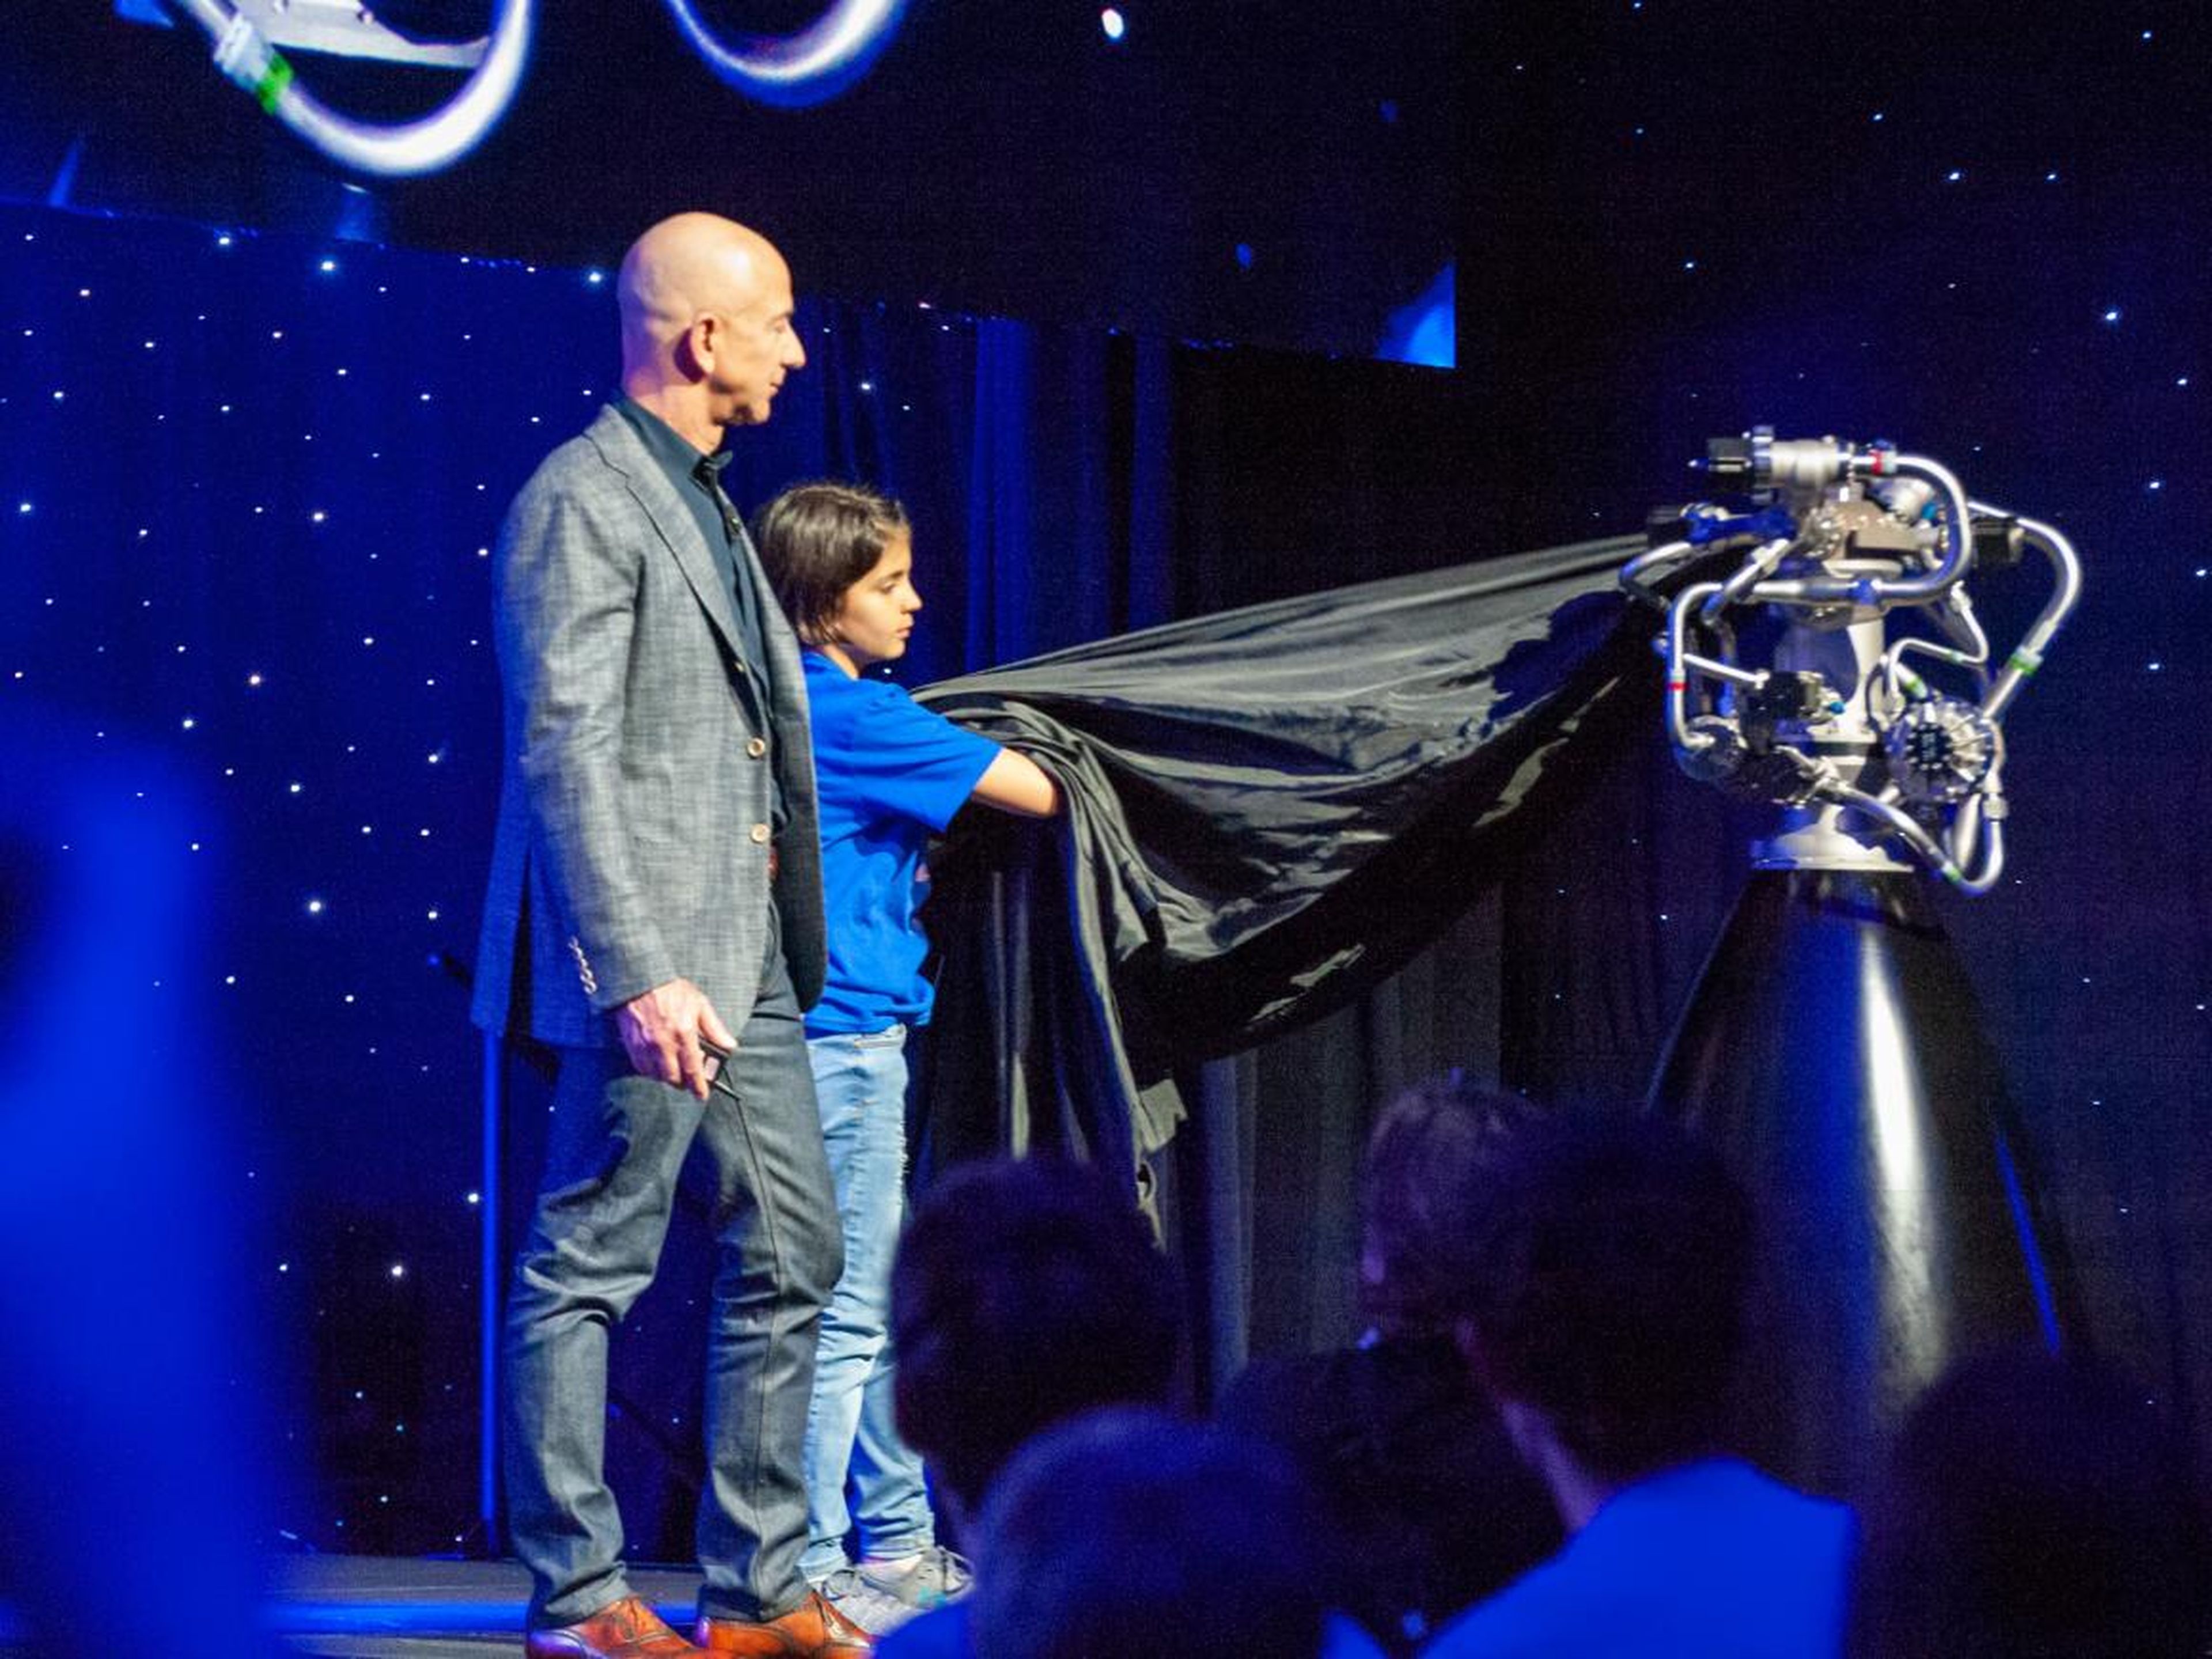 Although the lander was a model, Bezos did unveil an actual rocket engine, called BE-7, which is designed to power Blue Moon landers.